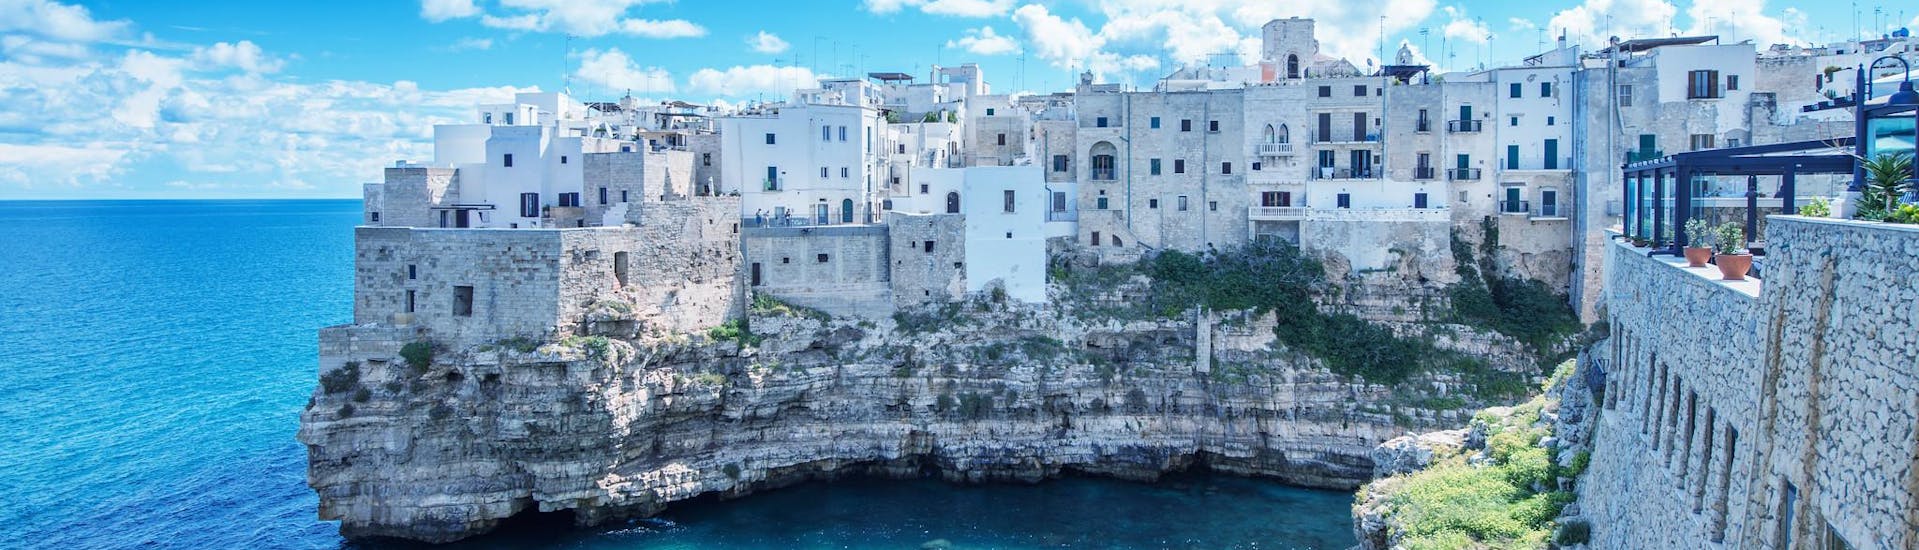 View of the coast during a boat trip to Polignano a Mare.